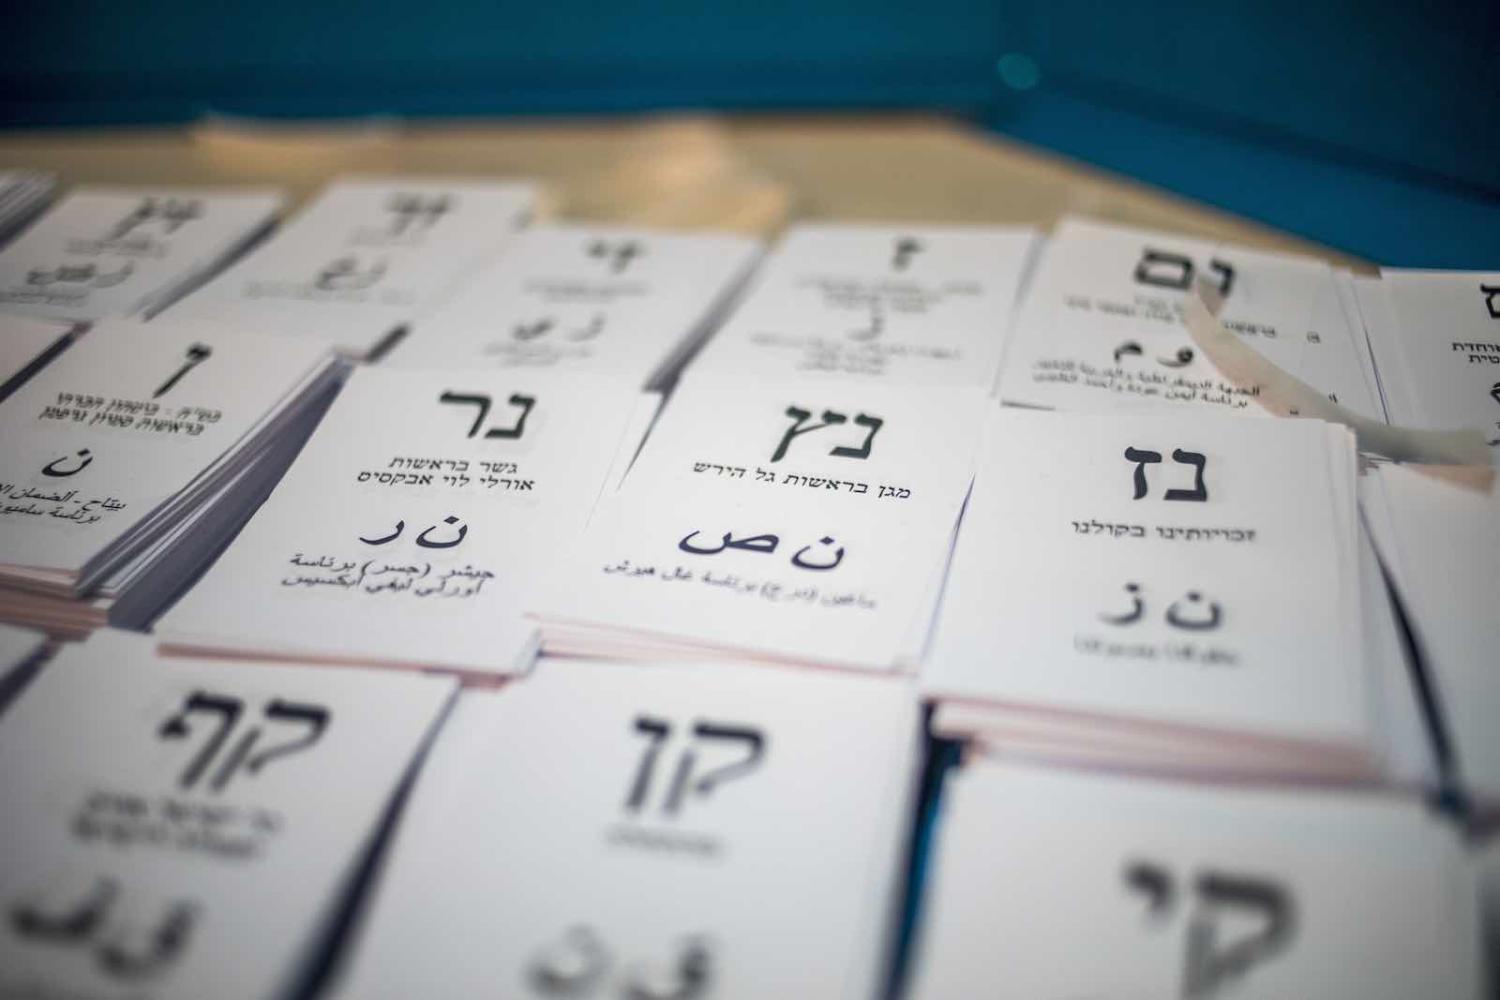 Ballots in the September 2019 elections (Photo: Bruno Thevenin via Getty Images)